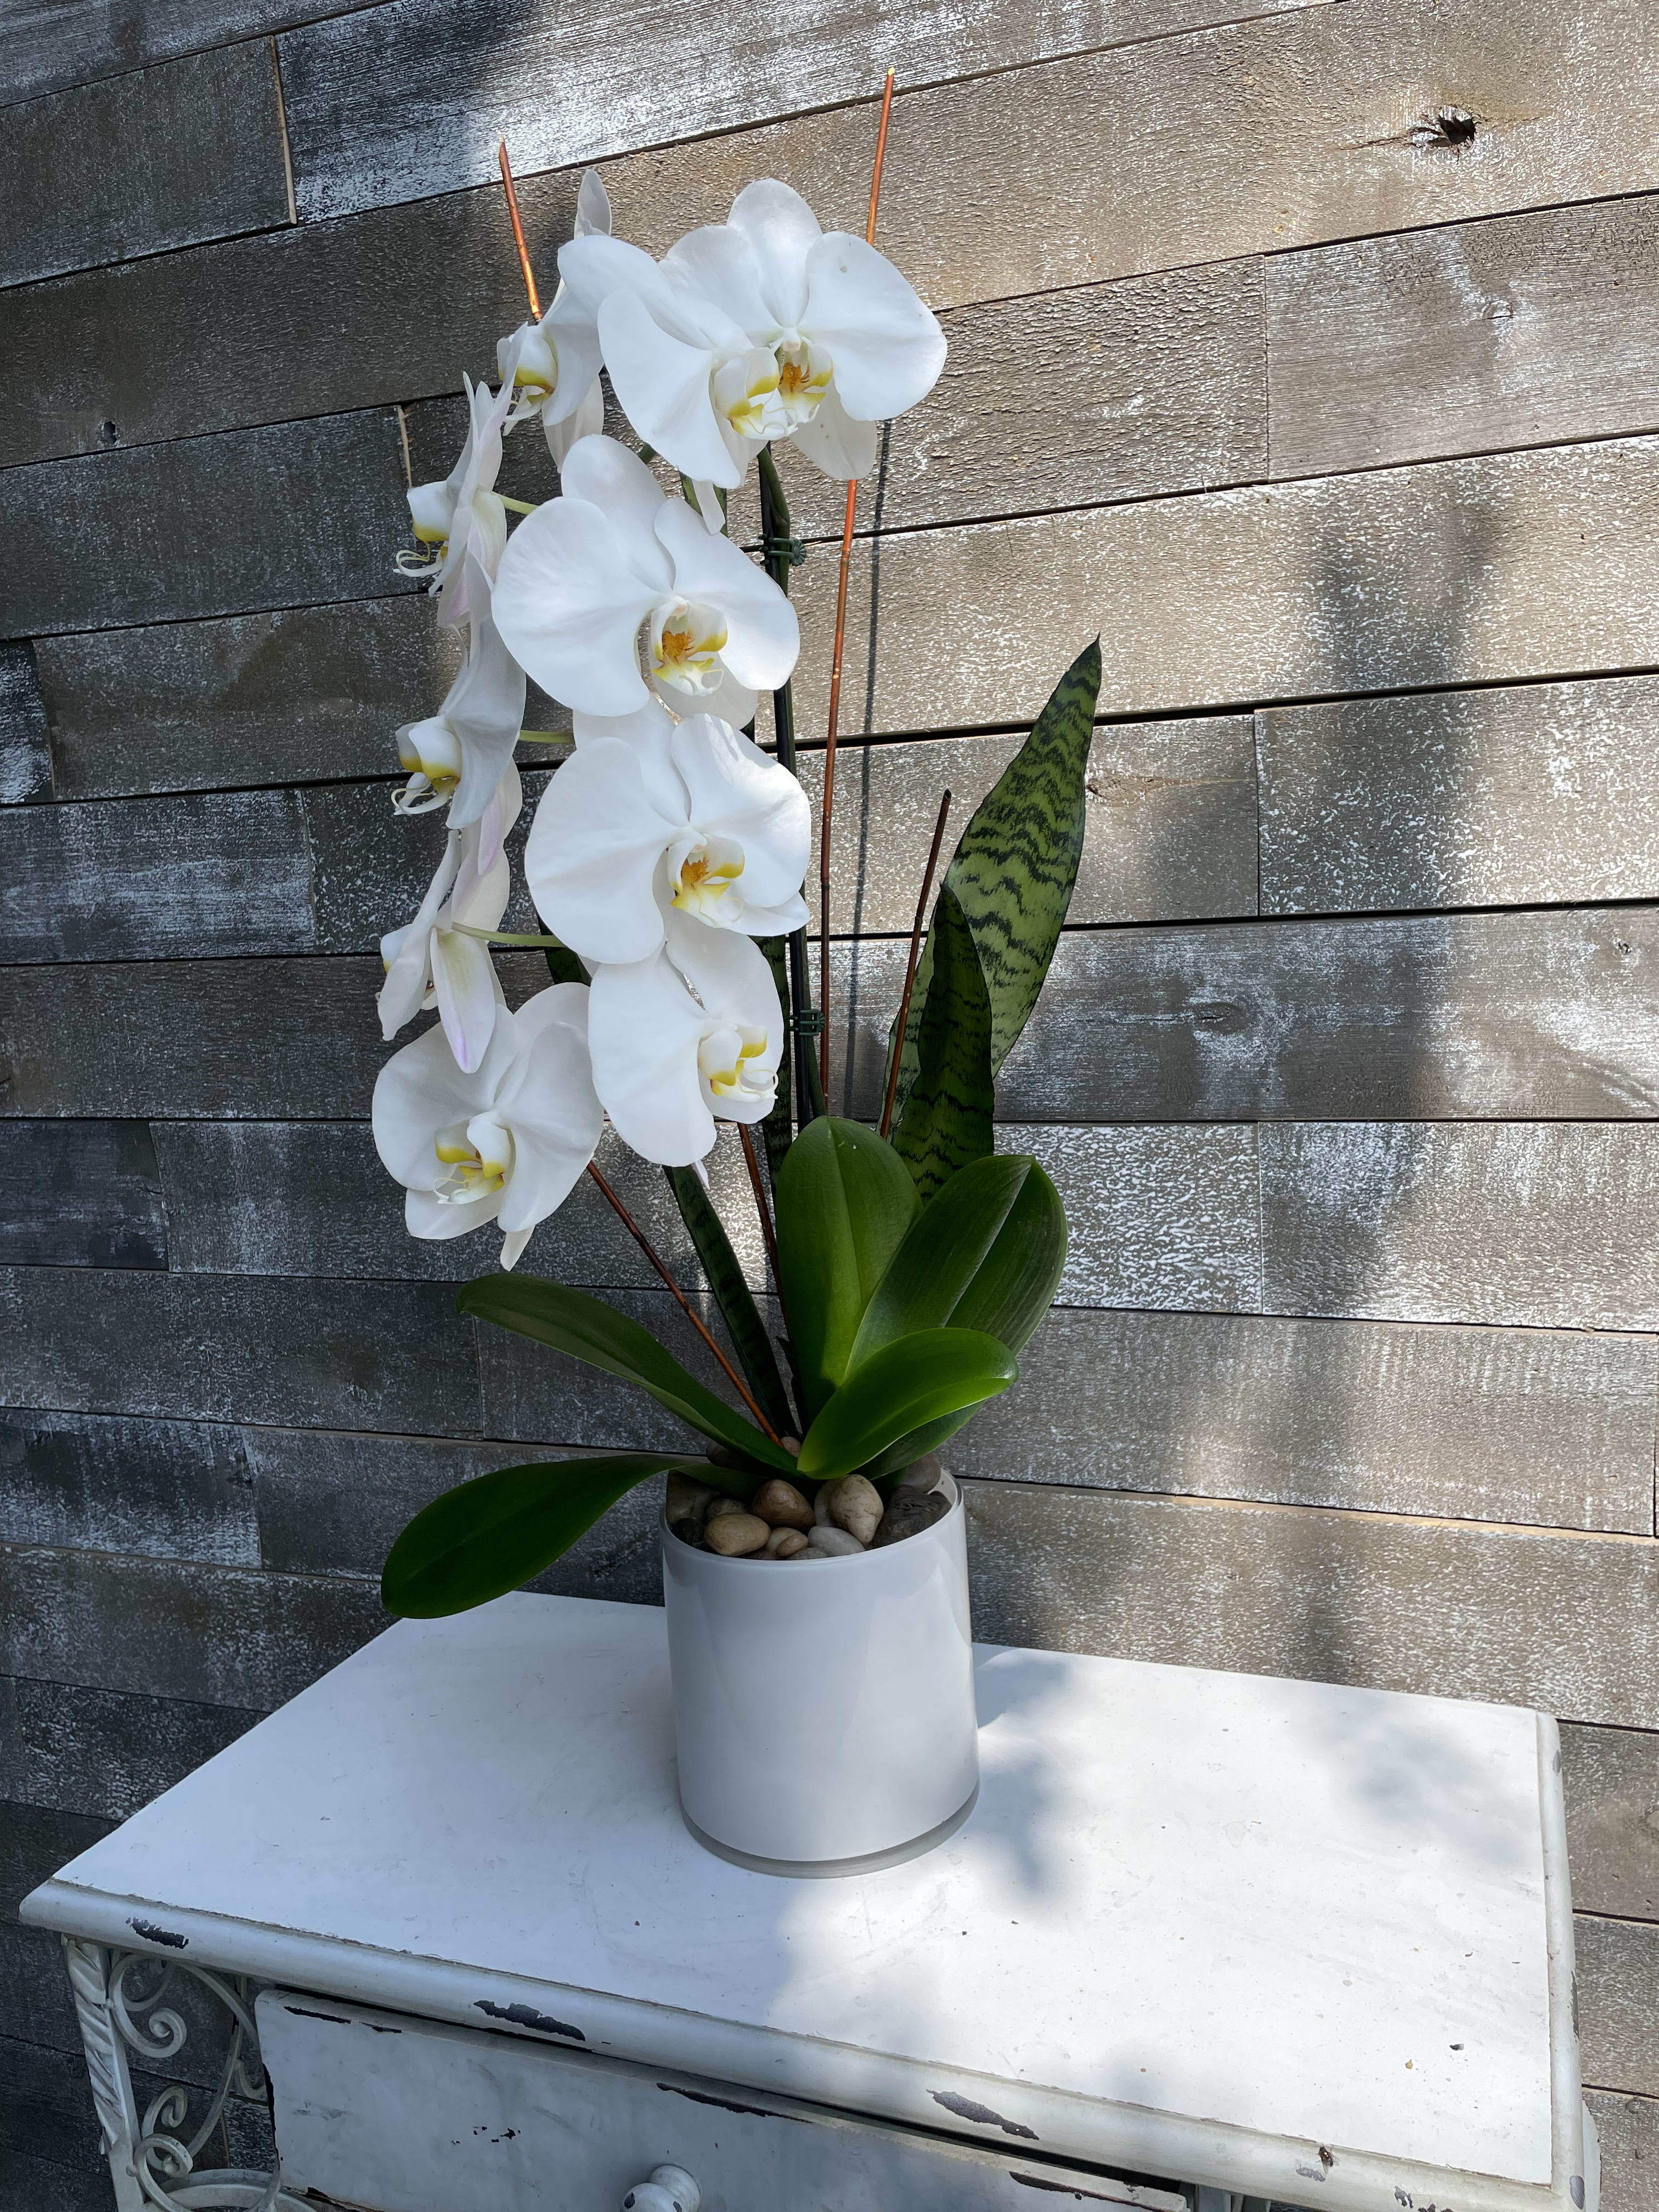 Soft spoken - Simple white orchid complimented by green snake plant in a modern white container 